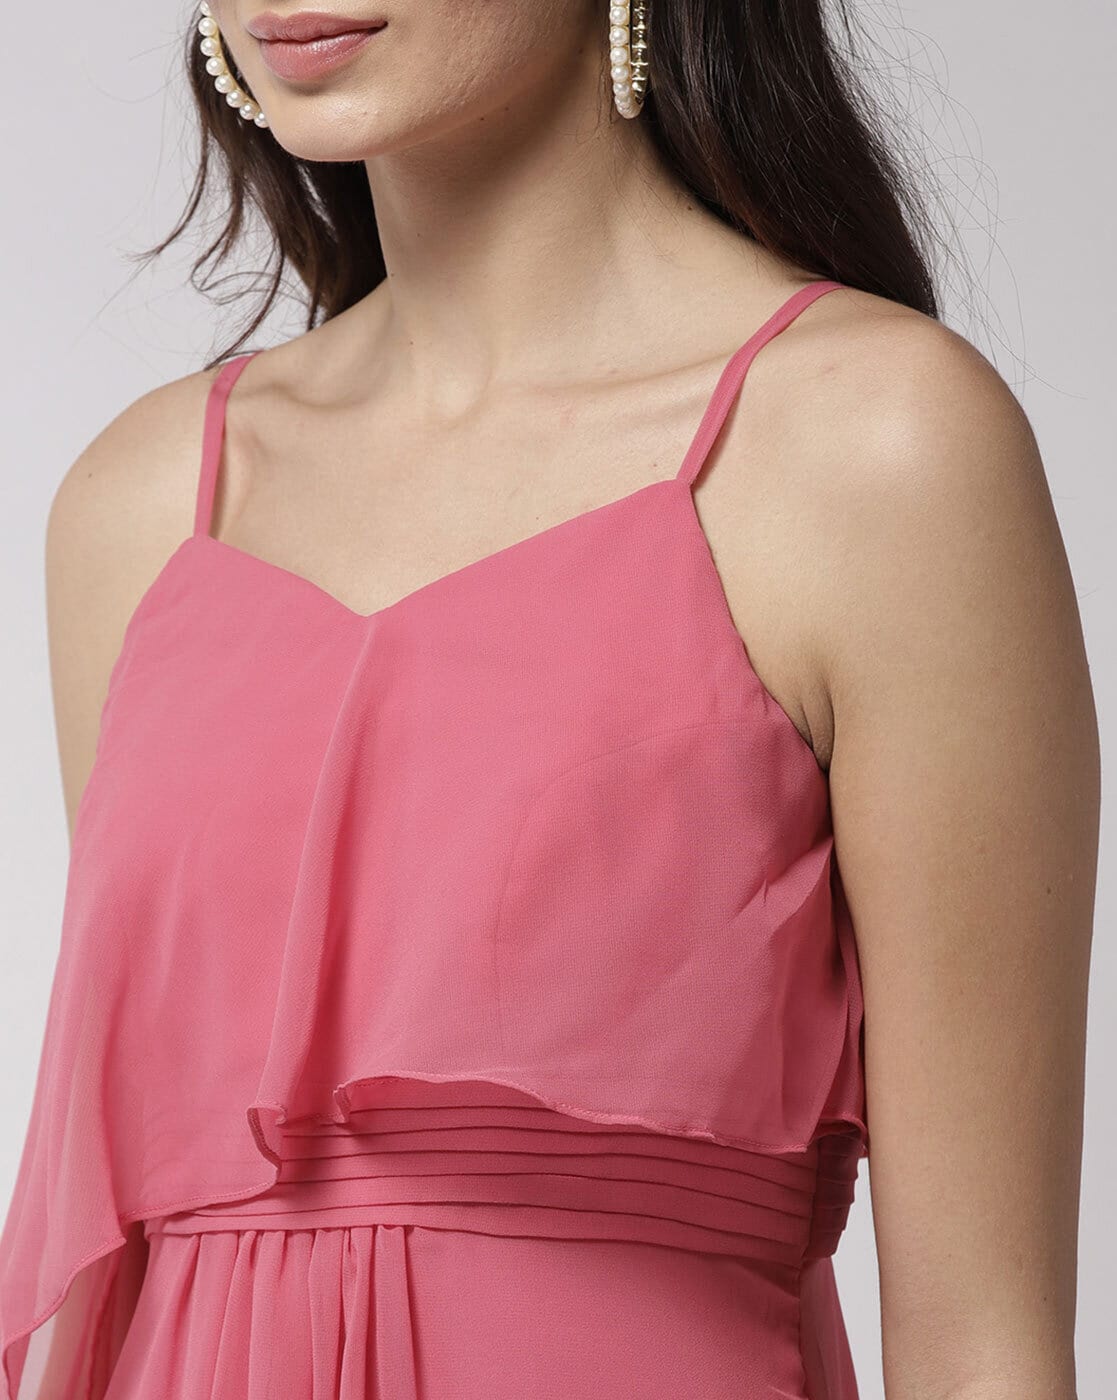 Buy Pink Dresses for Women by Mish Online